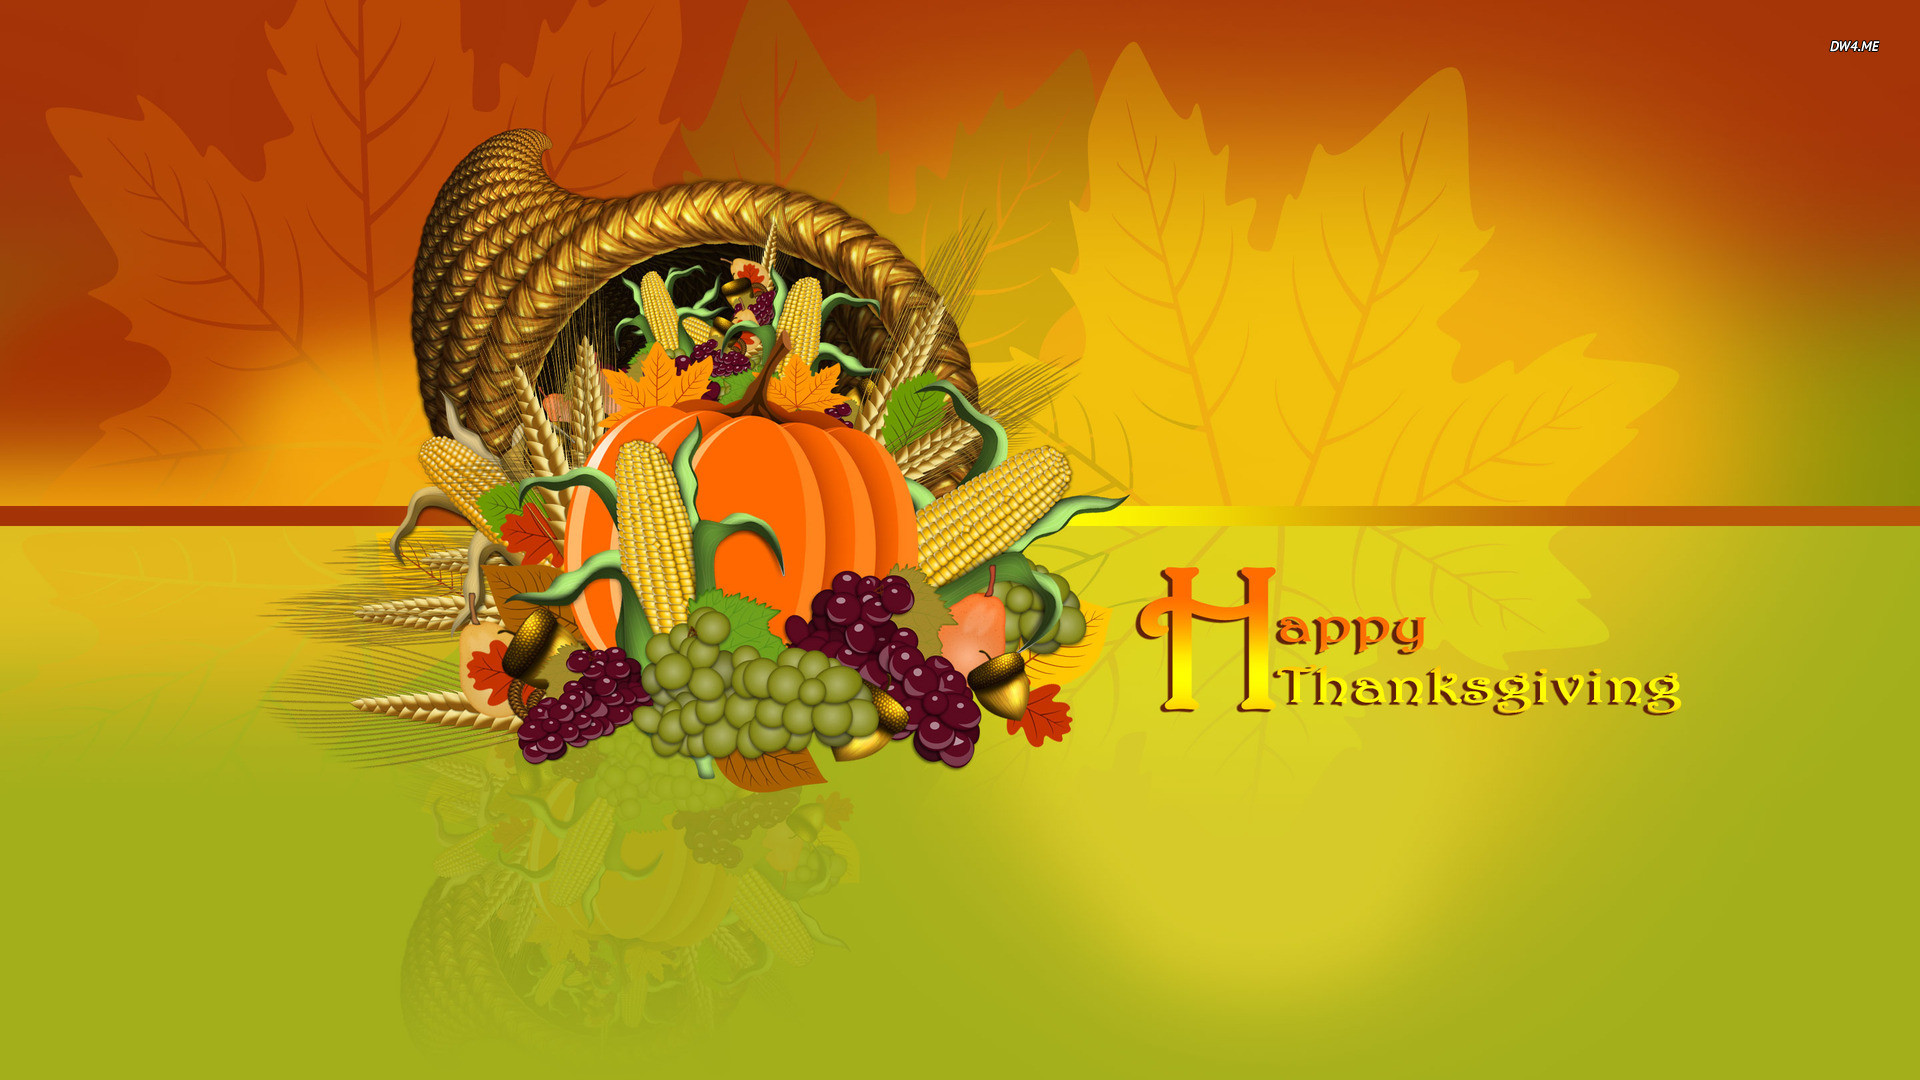 1920x1080 Top 15+ Images for Colorful Thanksgiving Wallpaper | Image No: 11. File Type